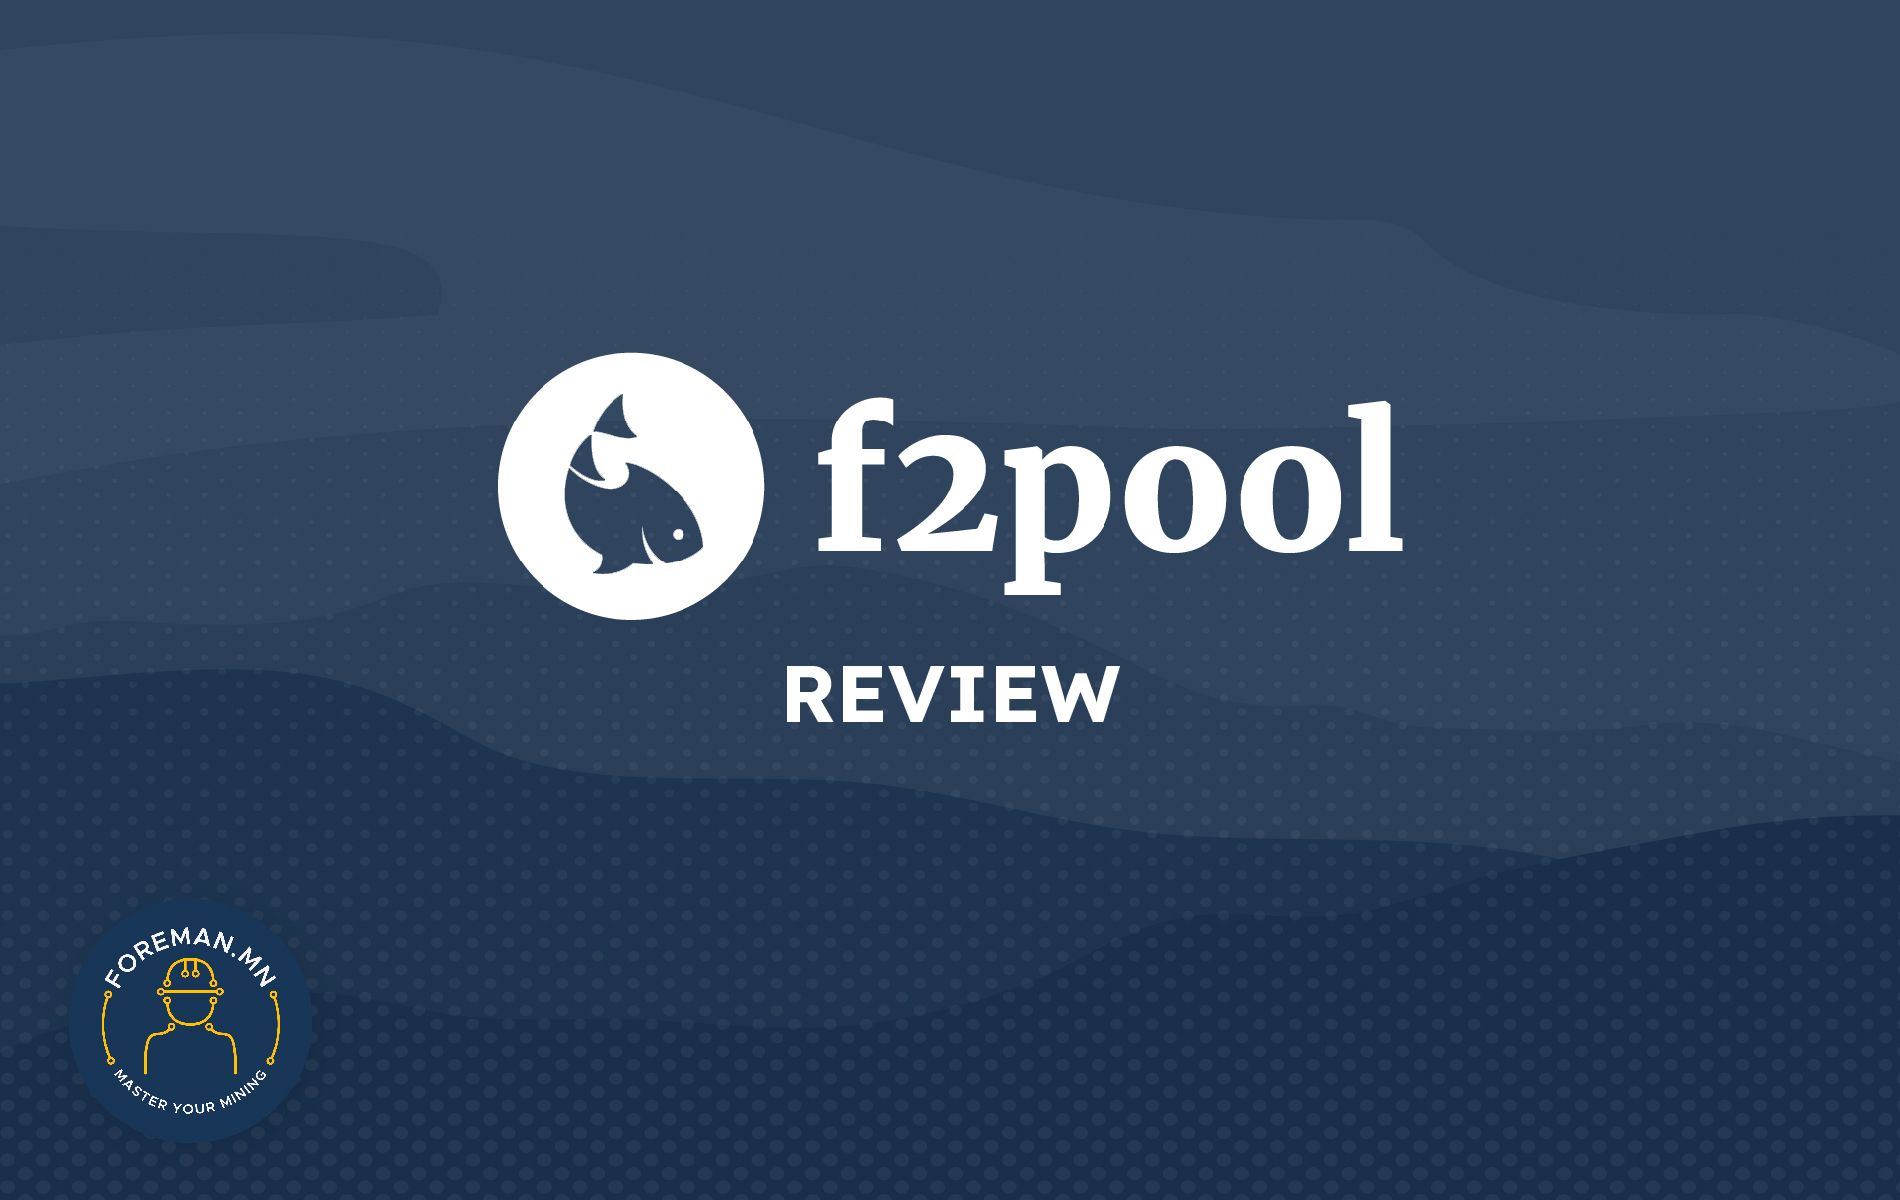 F2pool Customer Reviews - Is It Safe or Scam? | Cryptogeek